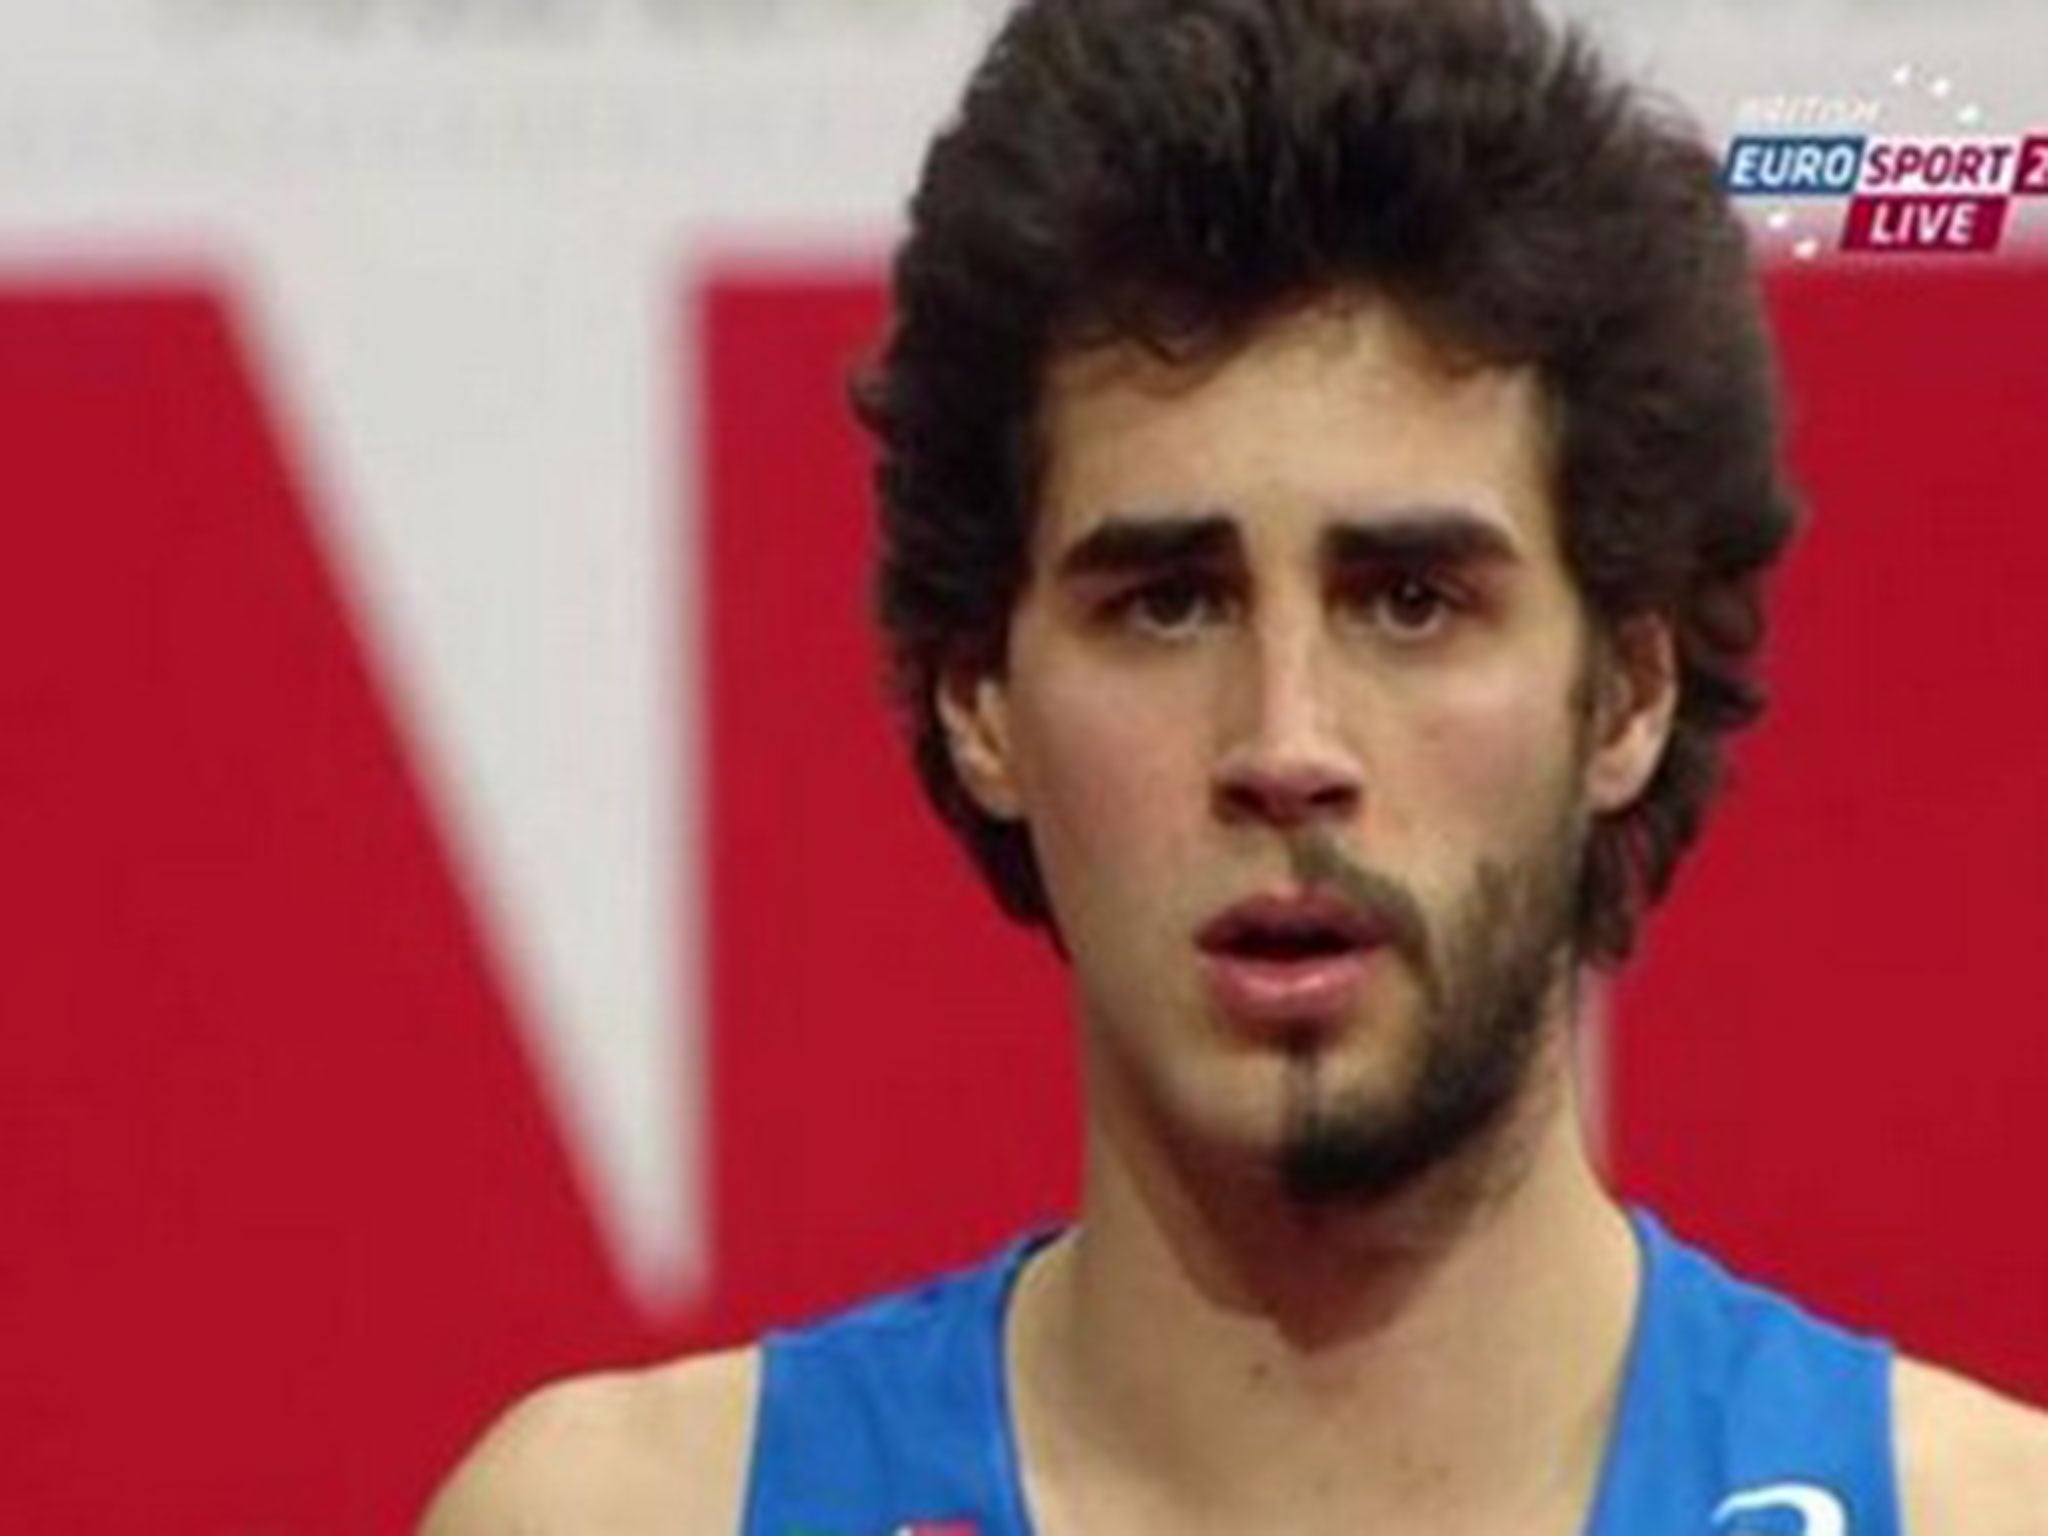 Italian high jumper shows up at the European Indoor Championships